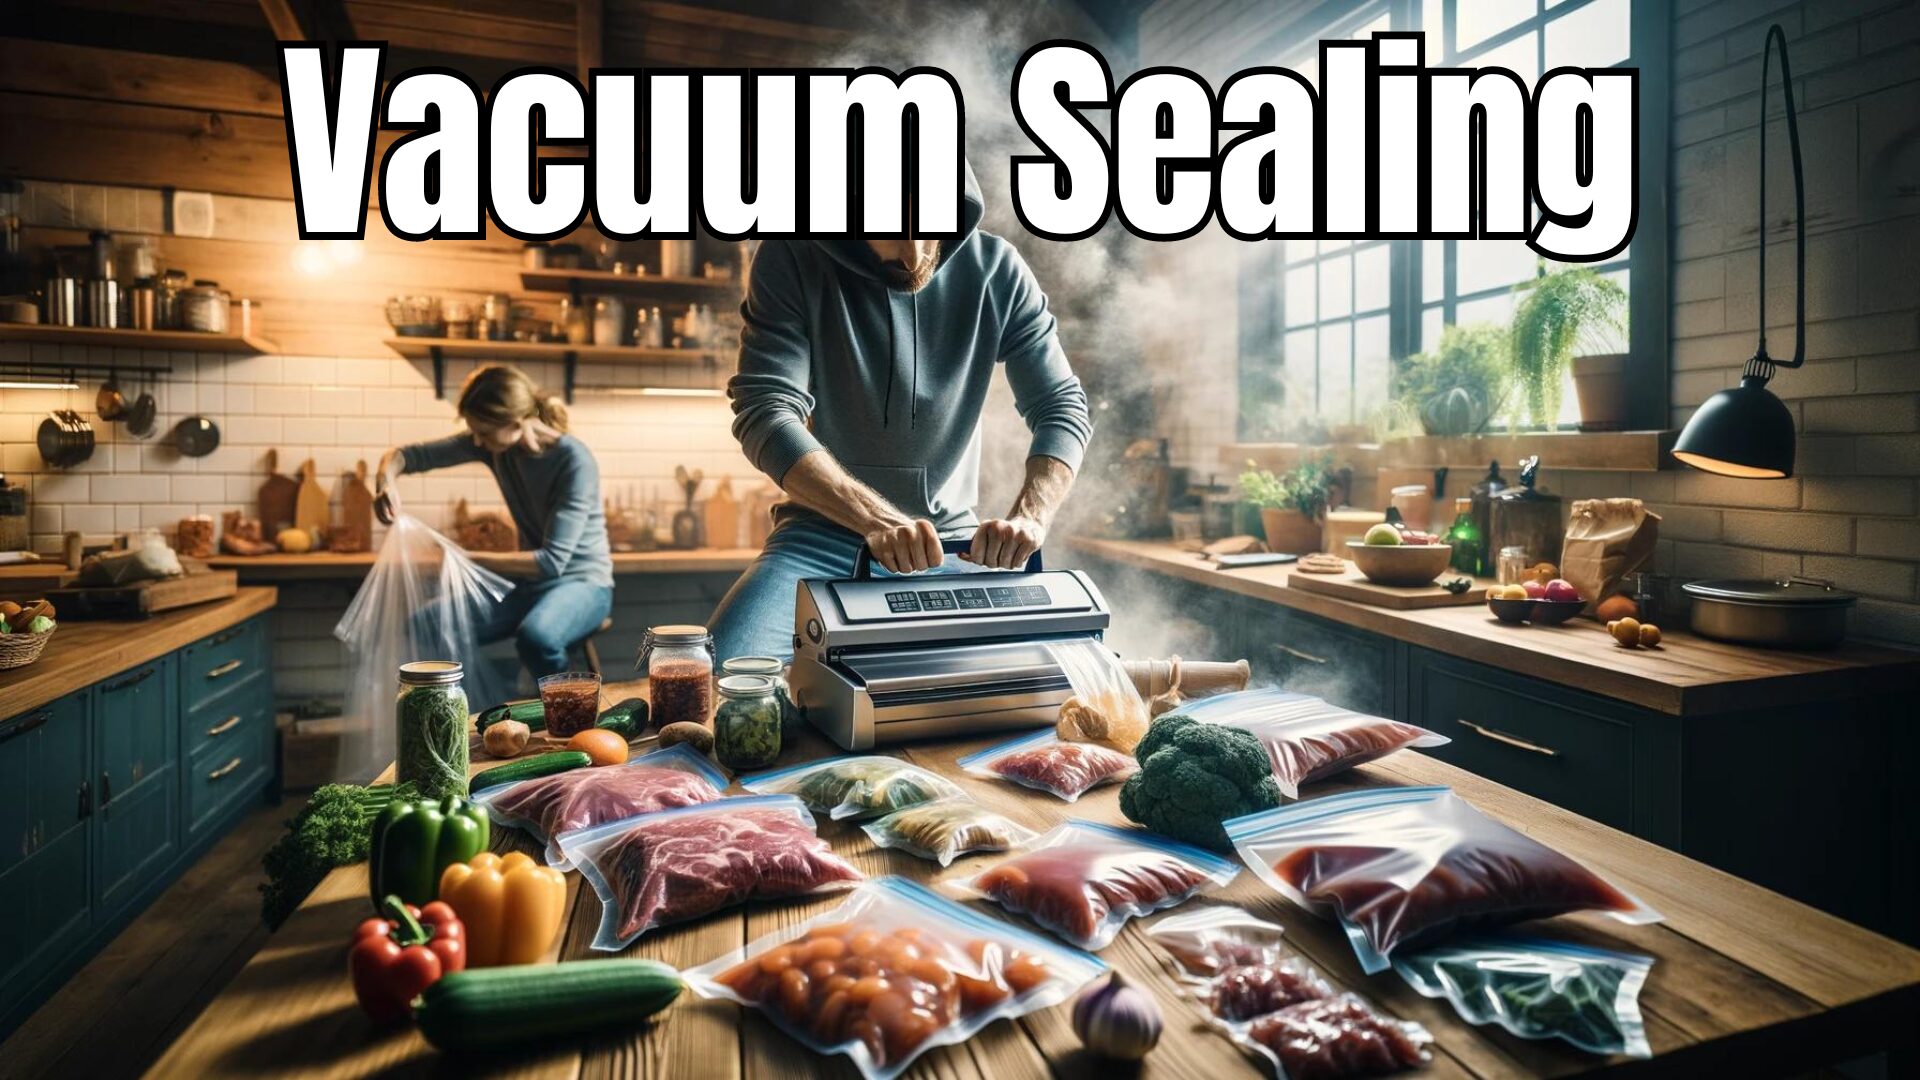 You are currently viewing Vacuum Sealing: Use a Vacuum Sealer to Preserve Food Items